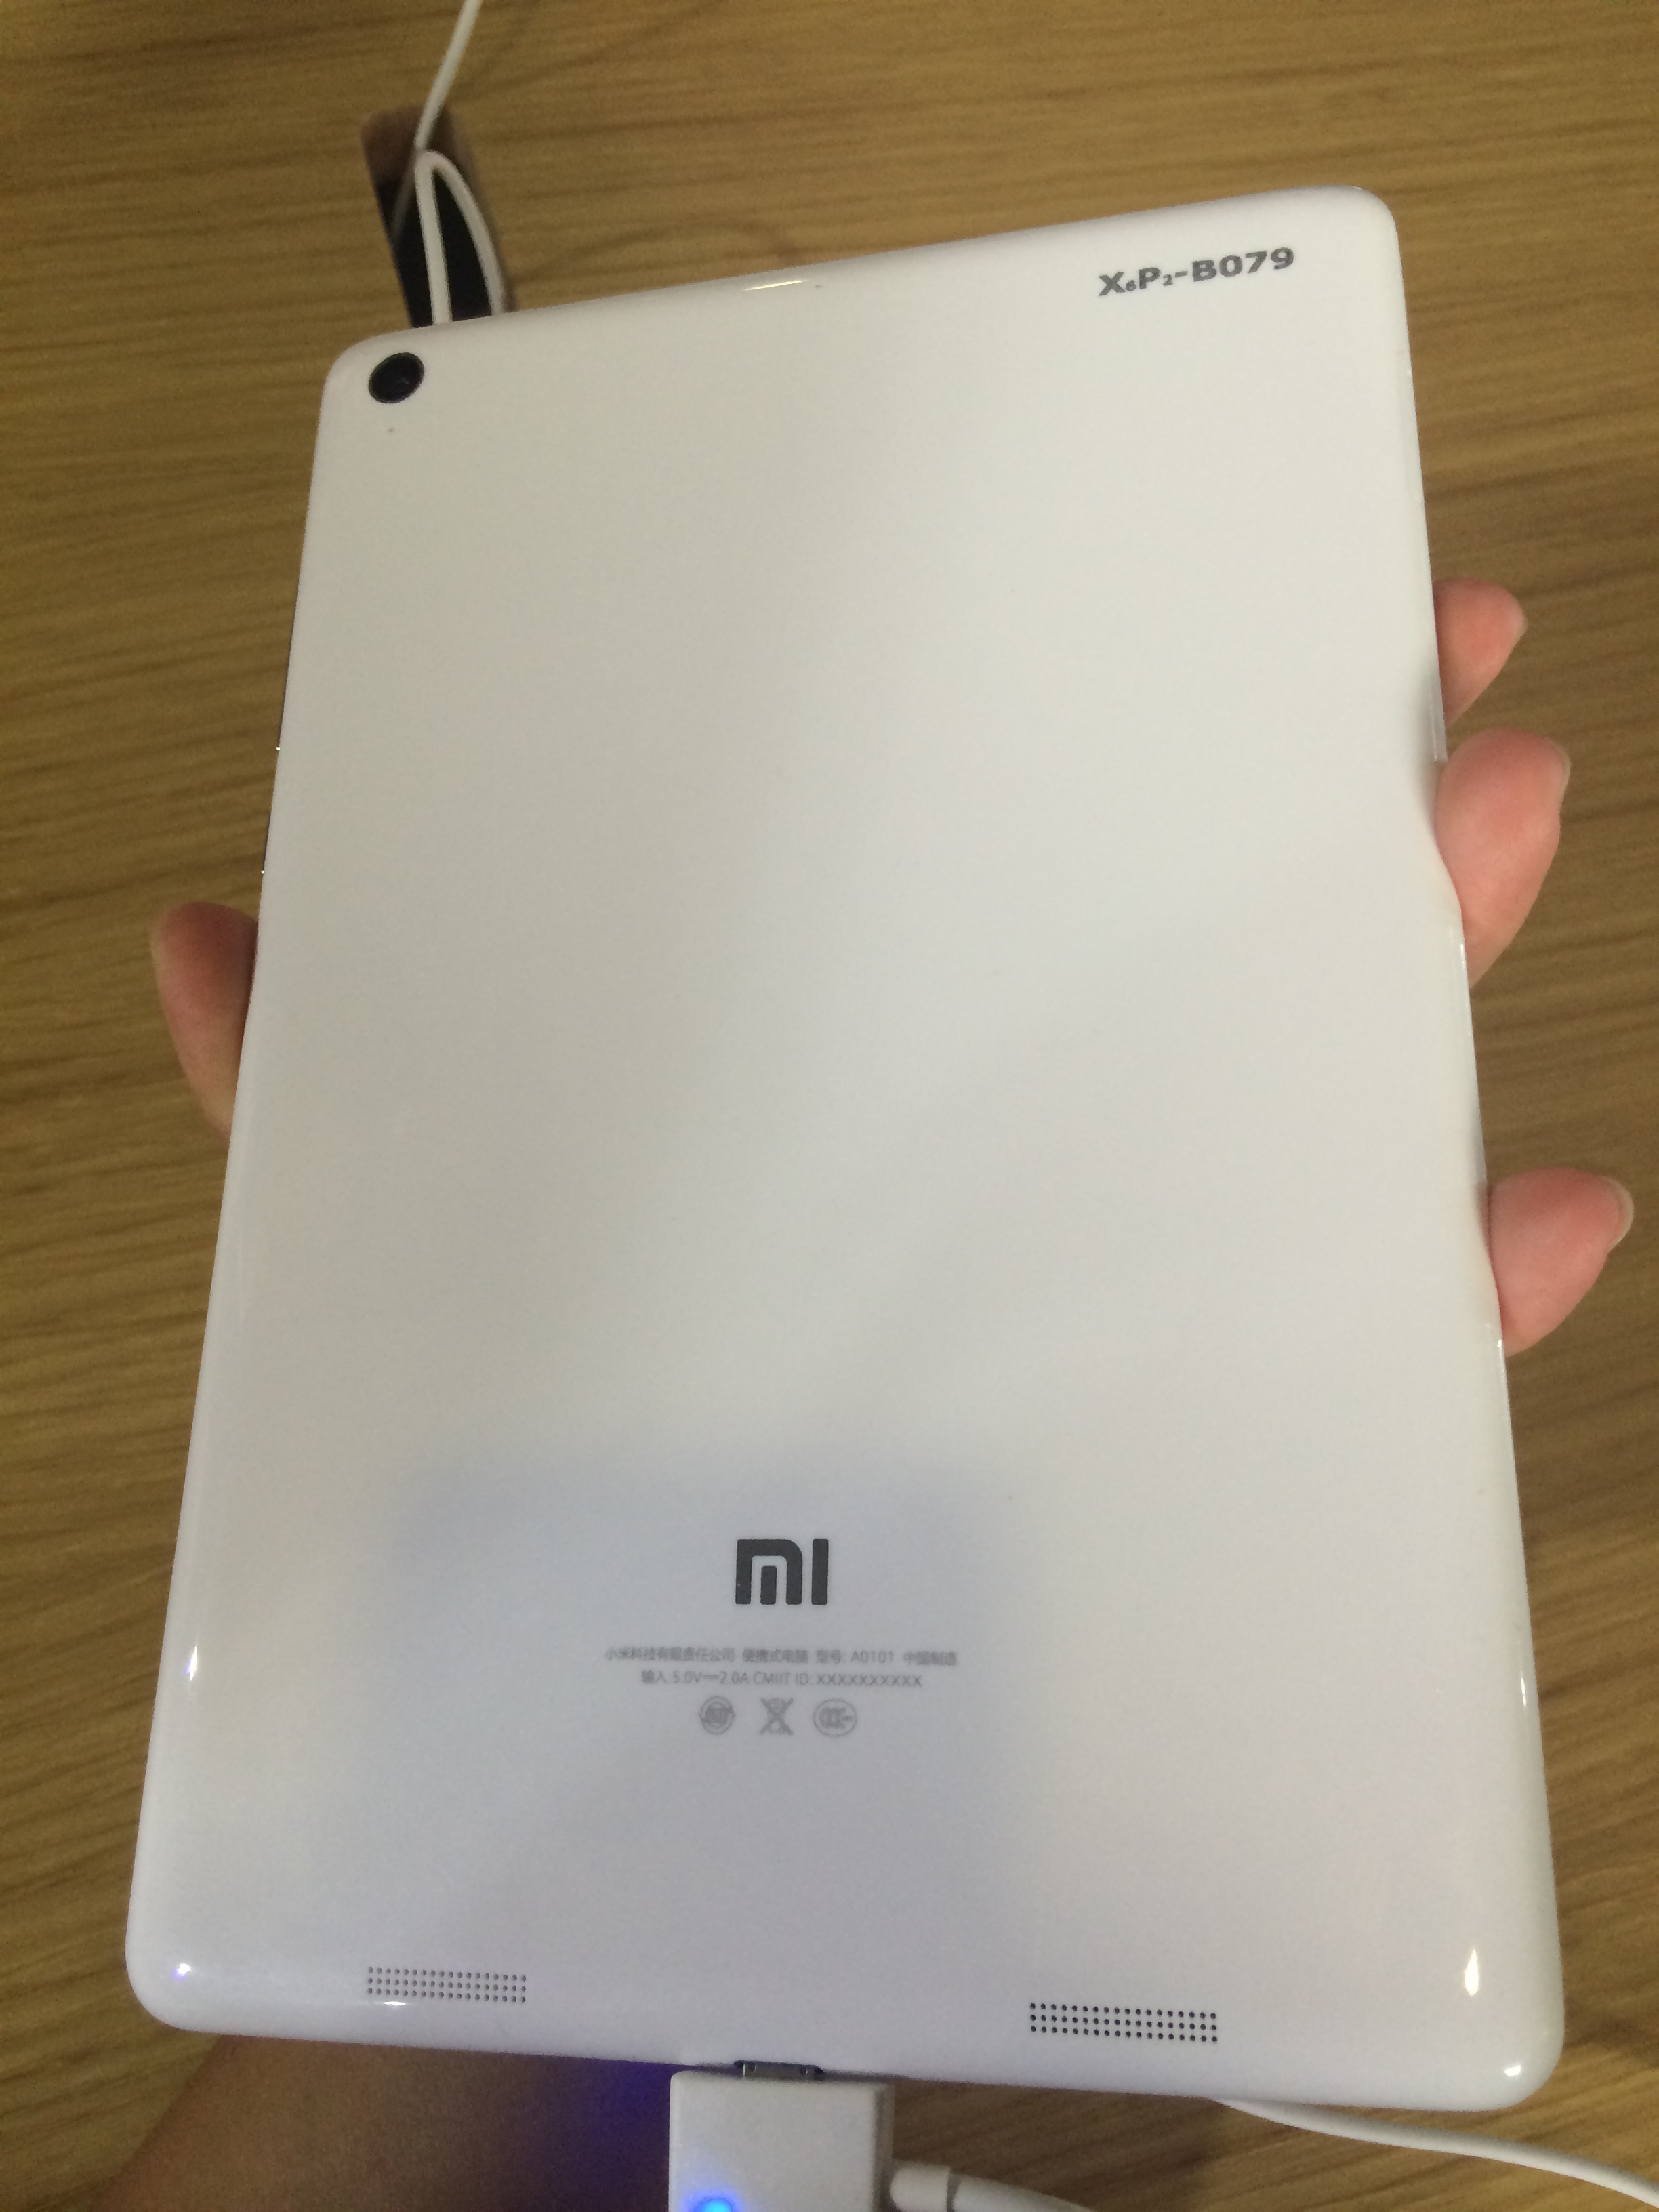 Xiaomi Mi Pad 5 will be an affordable iPad for those who prefer